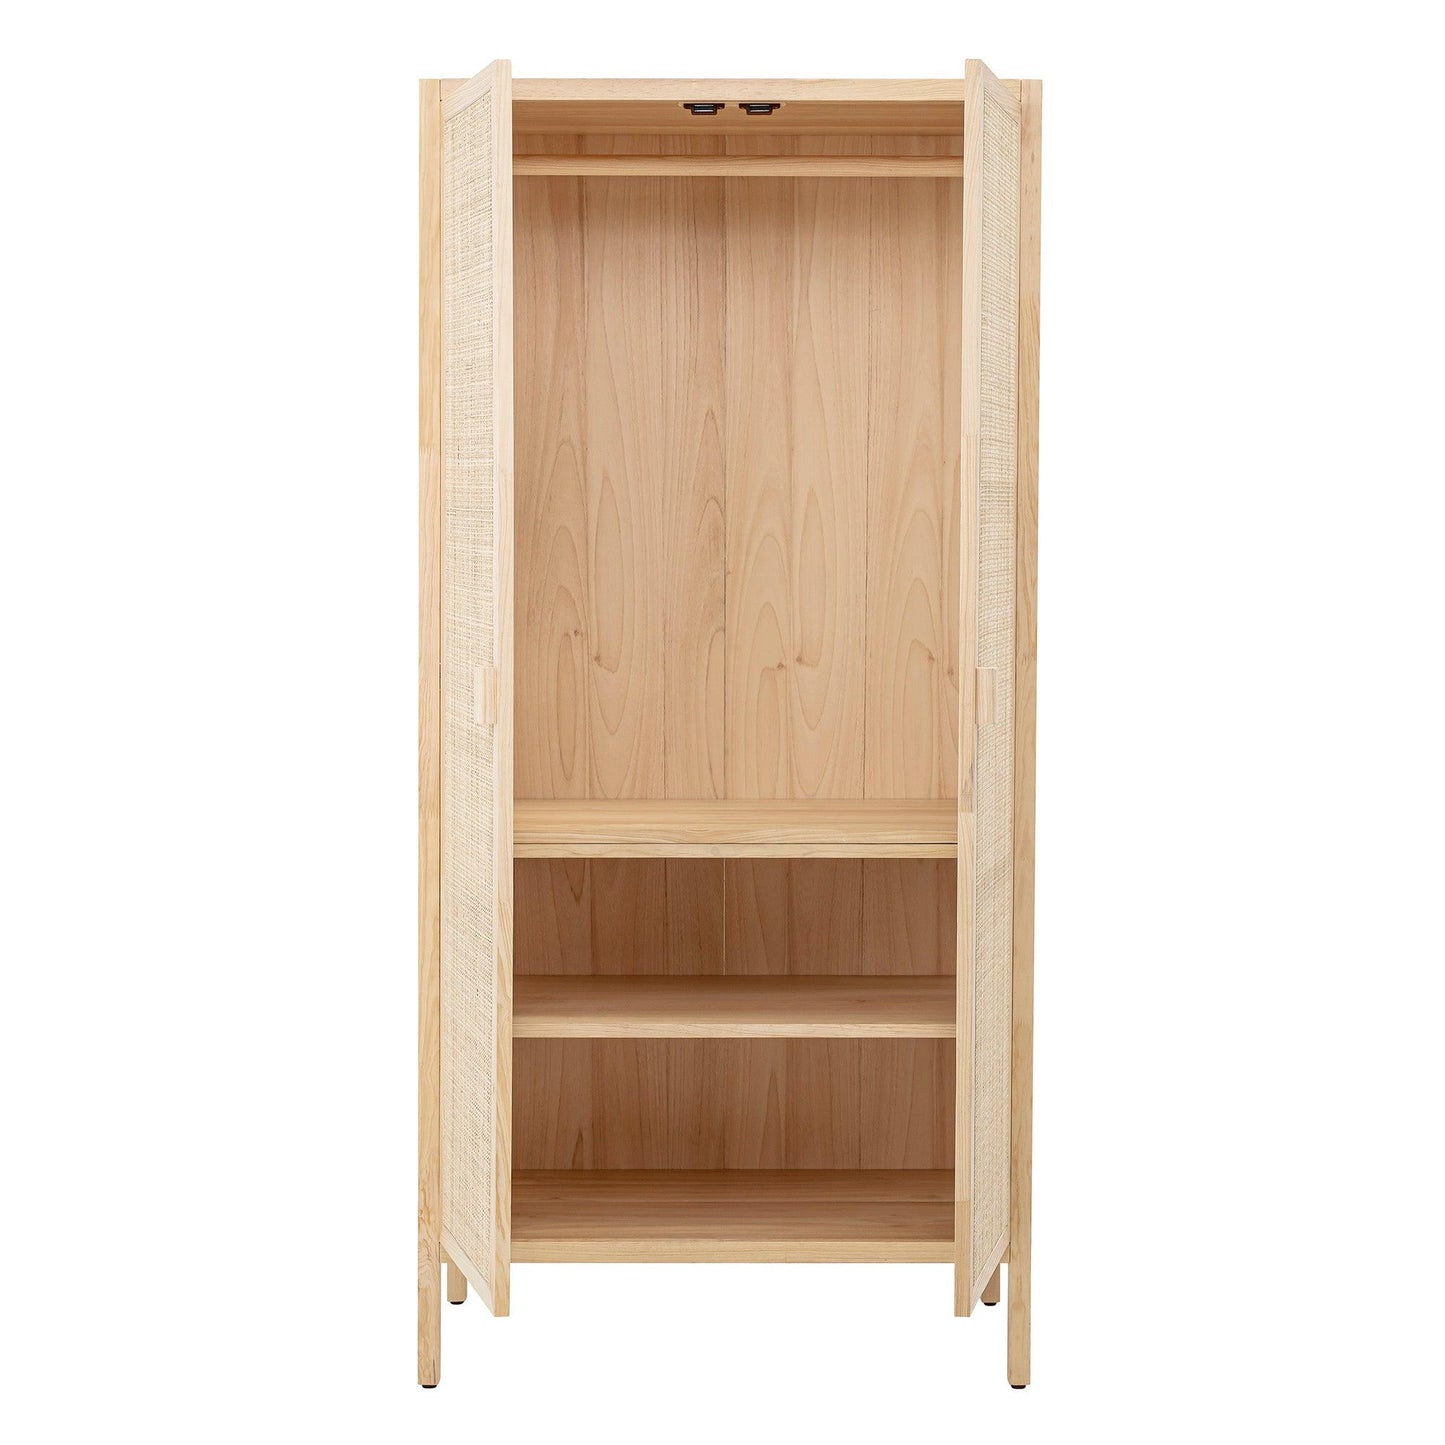 Nature Wood Cabinet